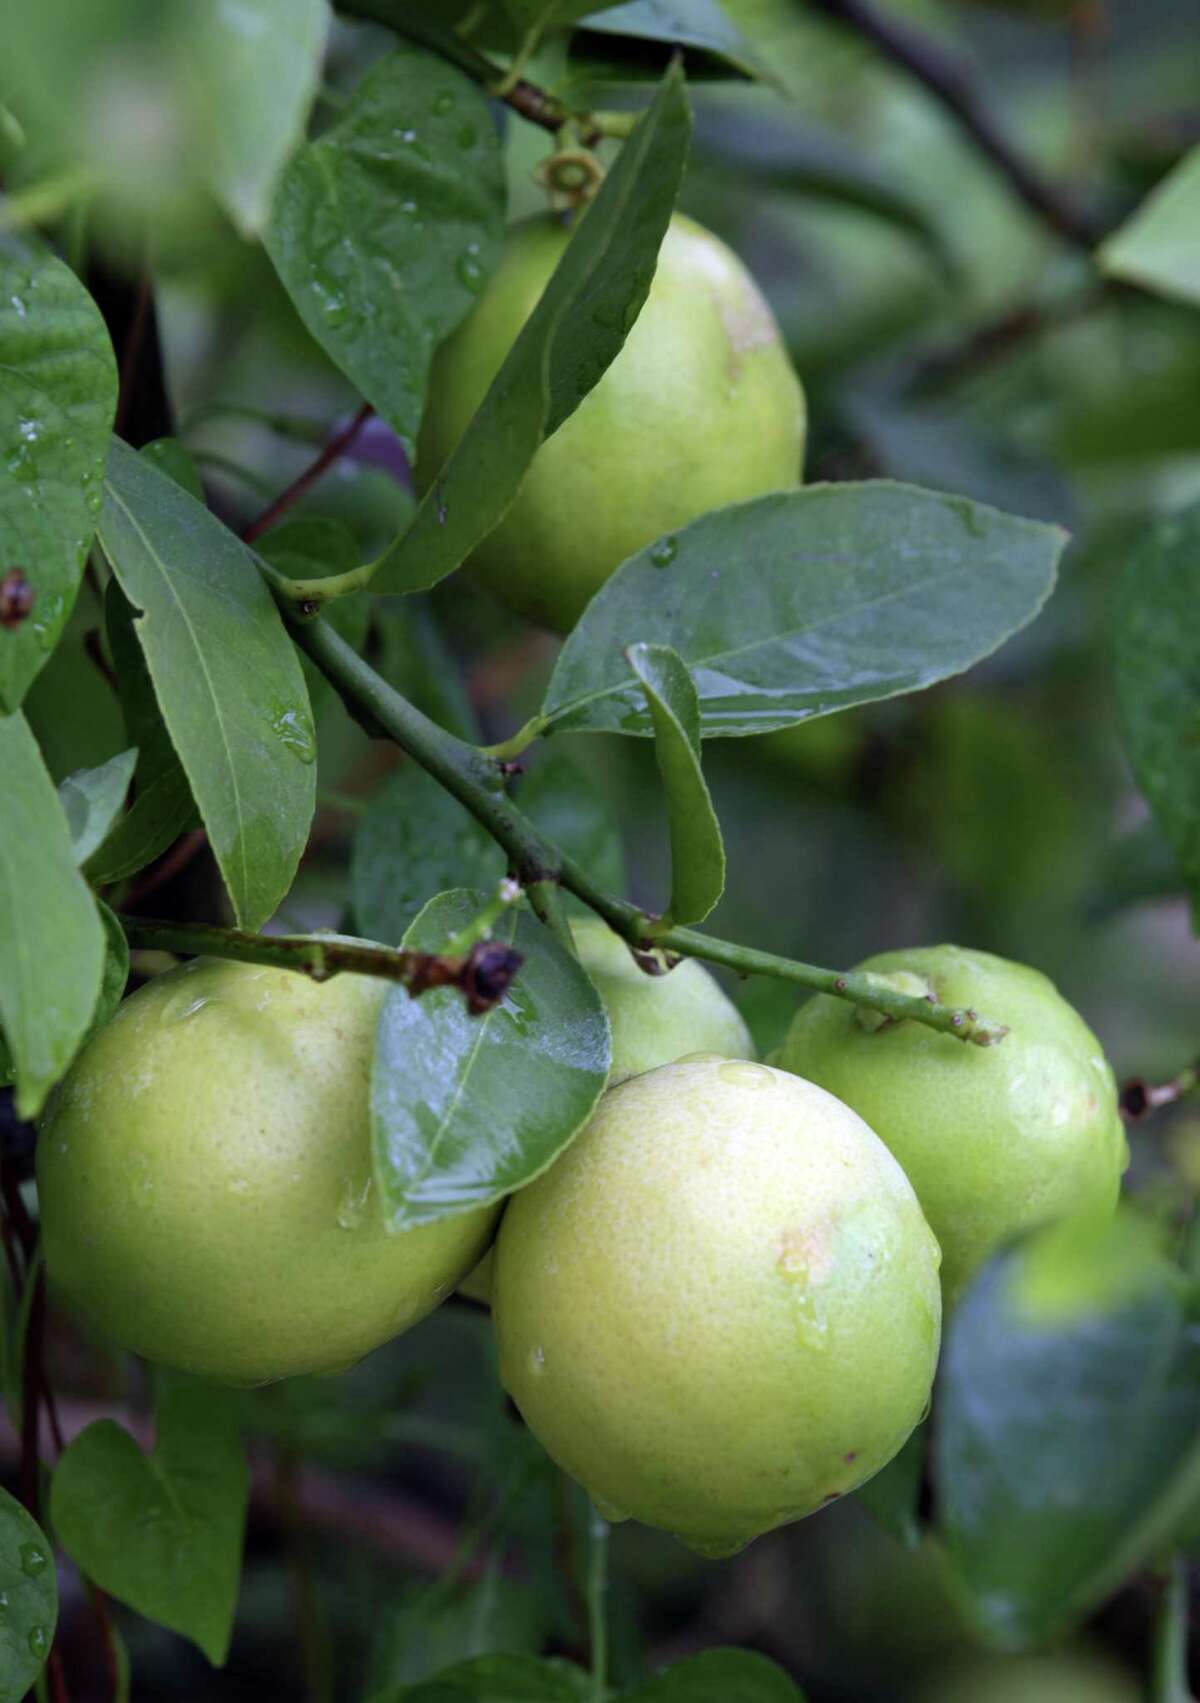 Citrus plantings received varying levels of damage from winter freezes. If you did not cover Mexican limes or Meyer lemons (pictured), the entire top could be killed.